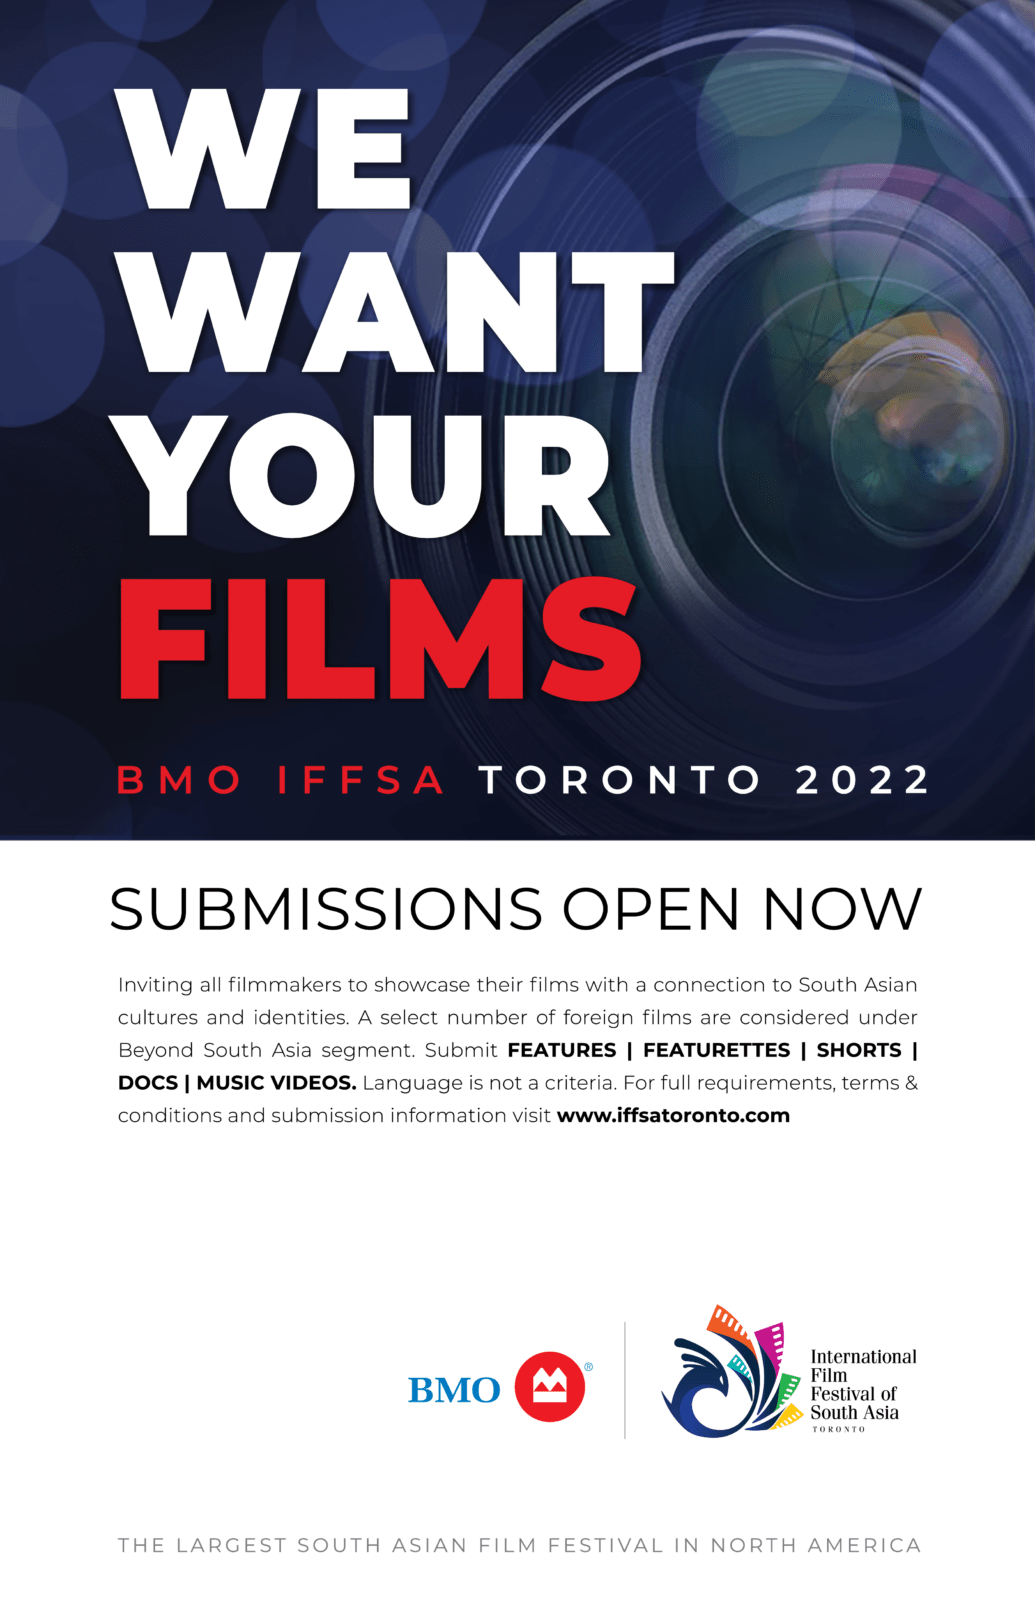 2022 FILM SUBMISSIONS